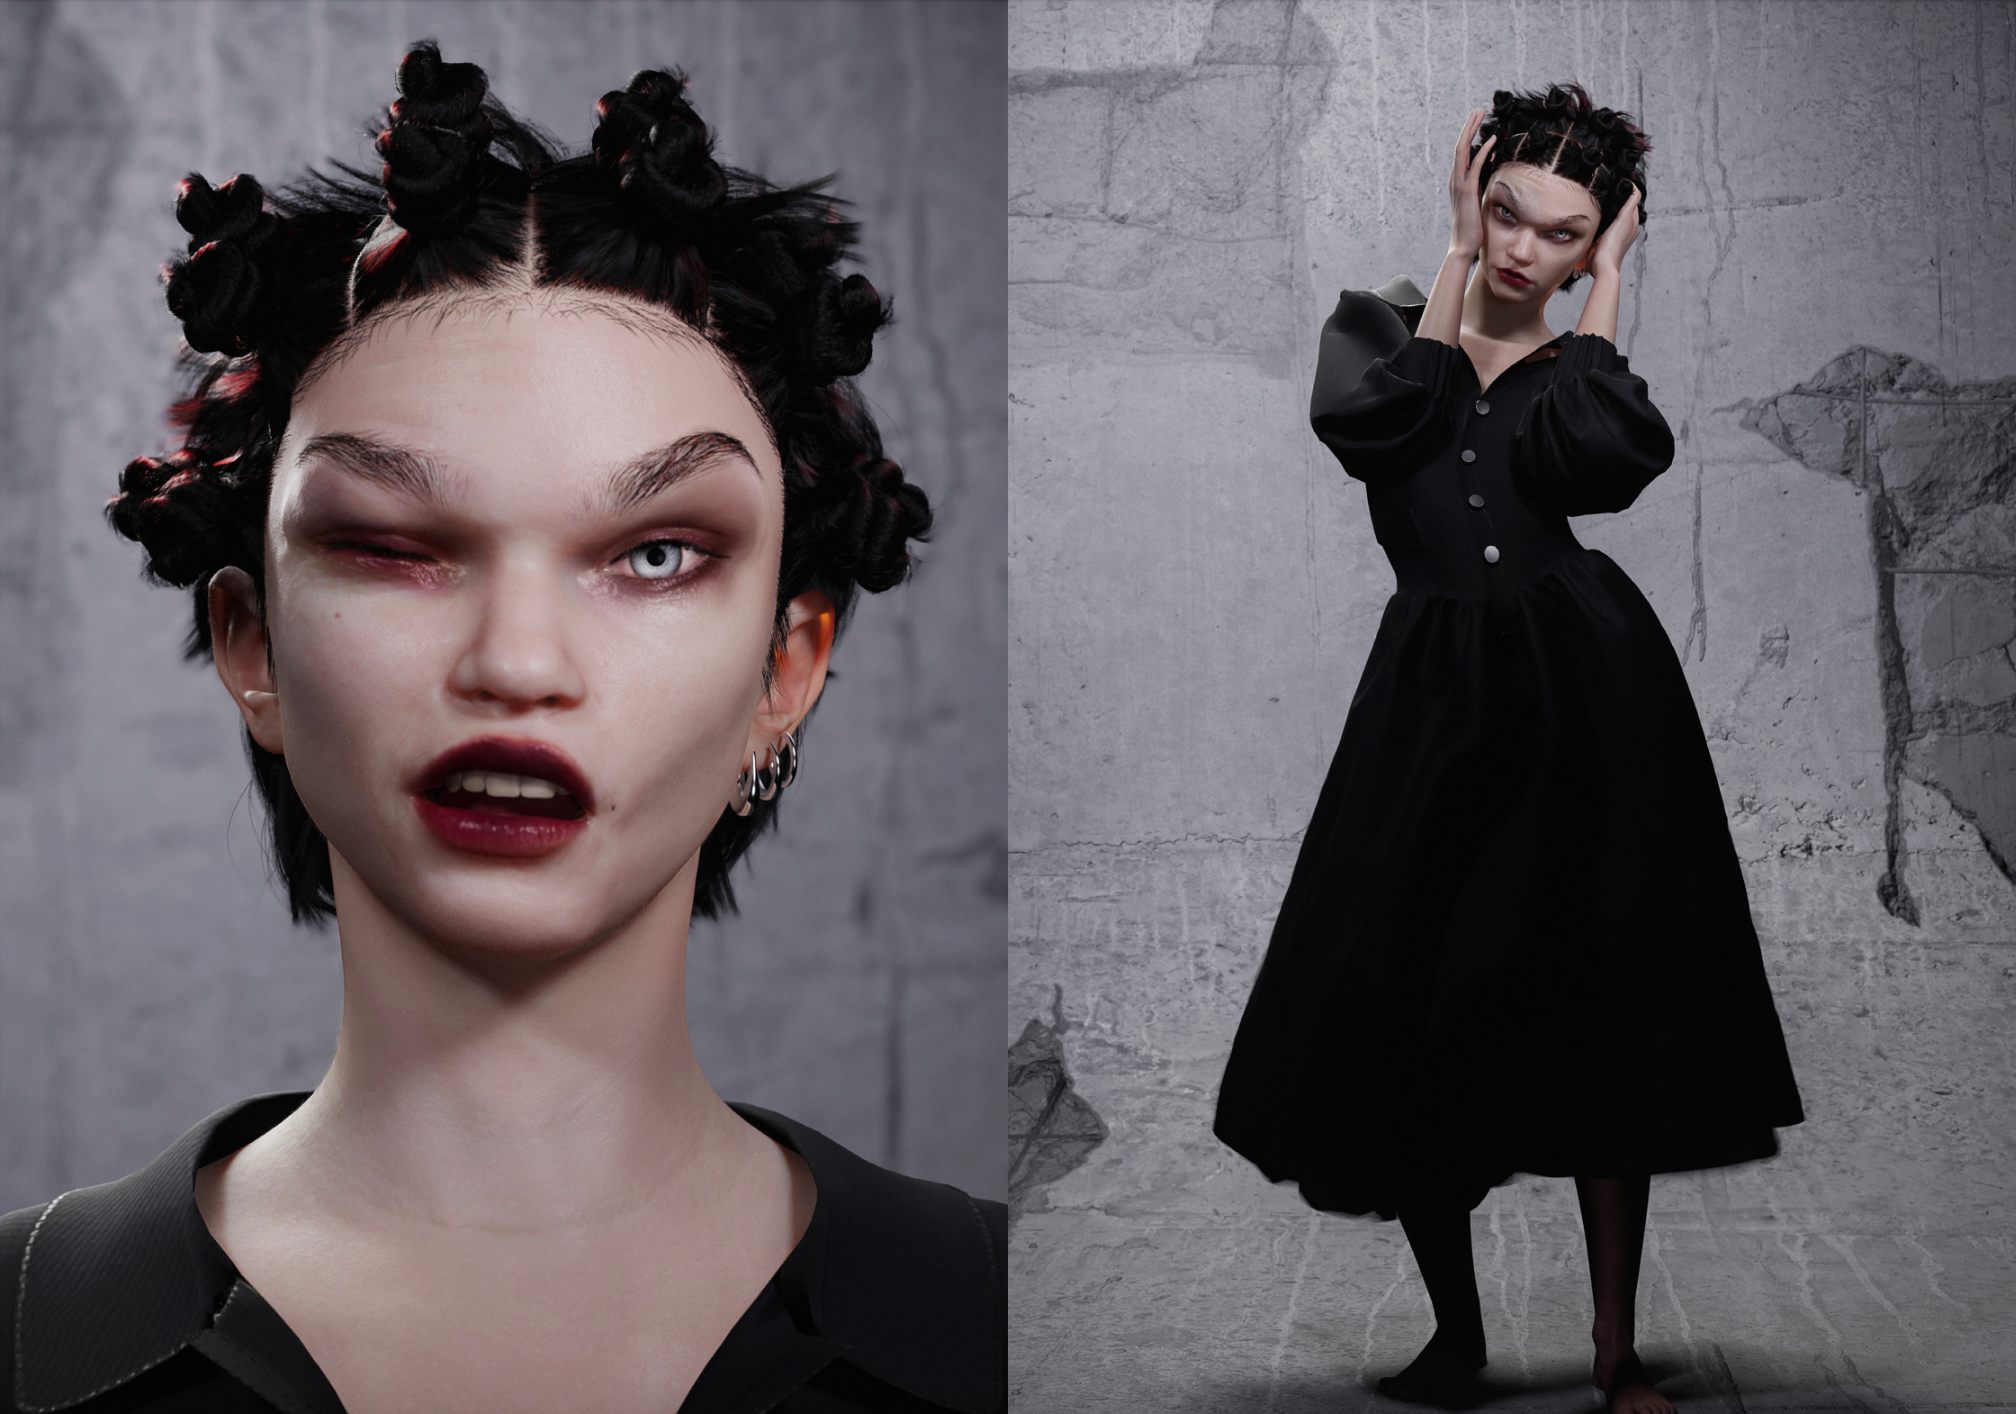 Digital avatar ecosystem Colonii is investing in developing hyper-realistic persona's that draw inspiration from subcultures and high fashion. Photo: Colonii